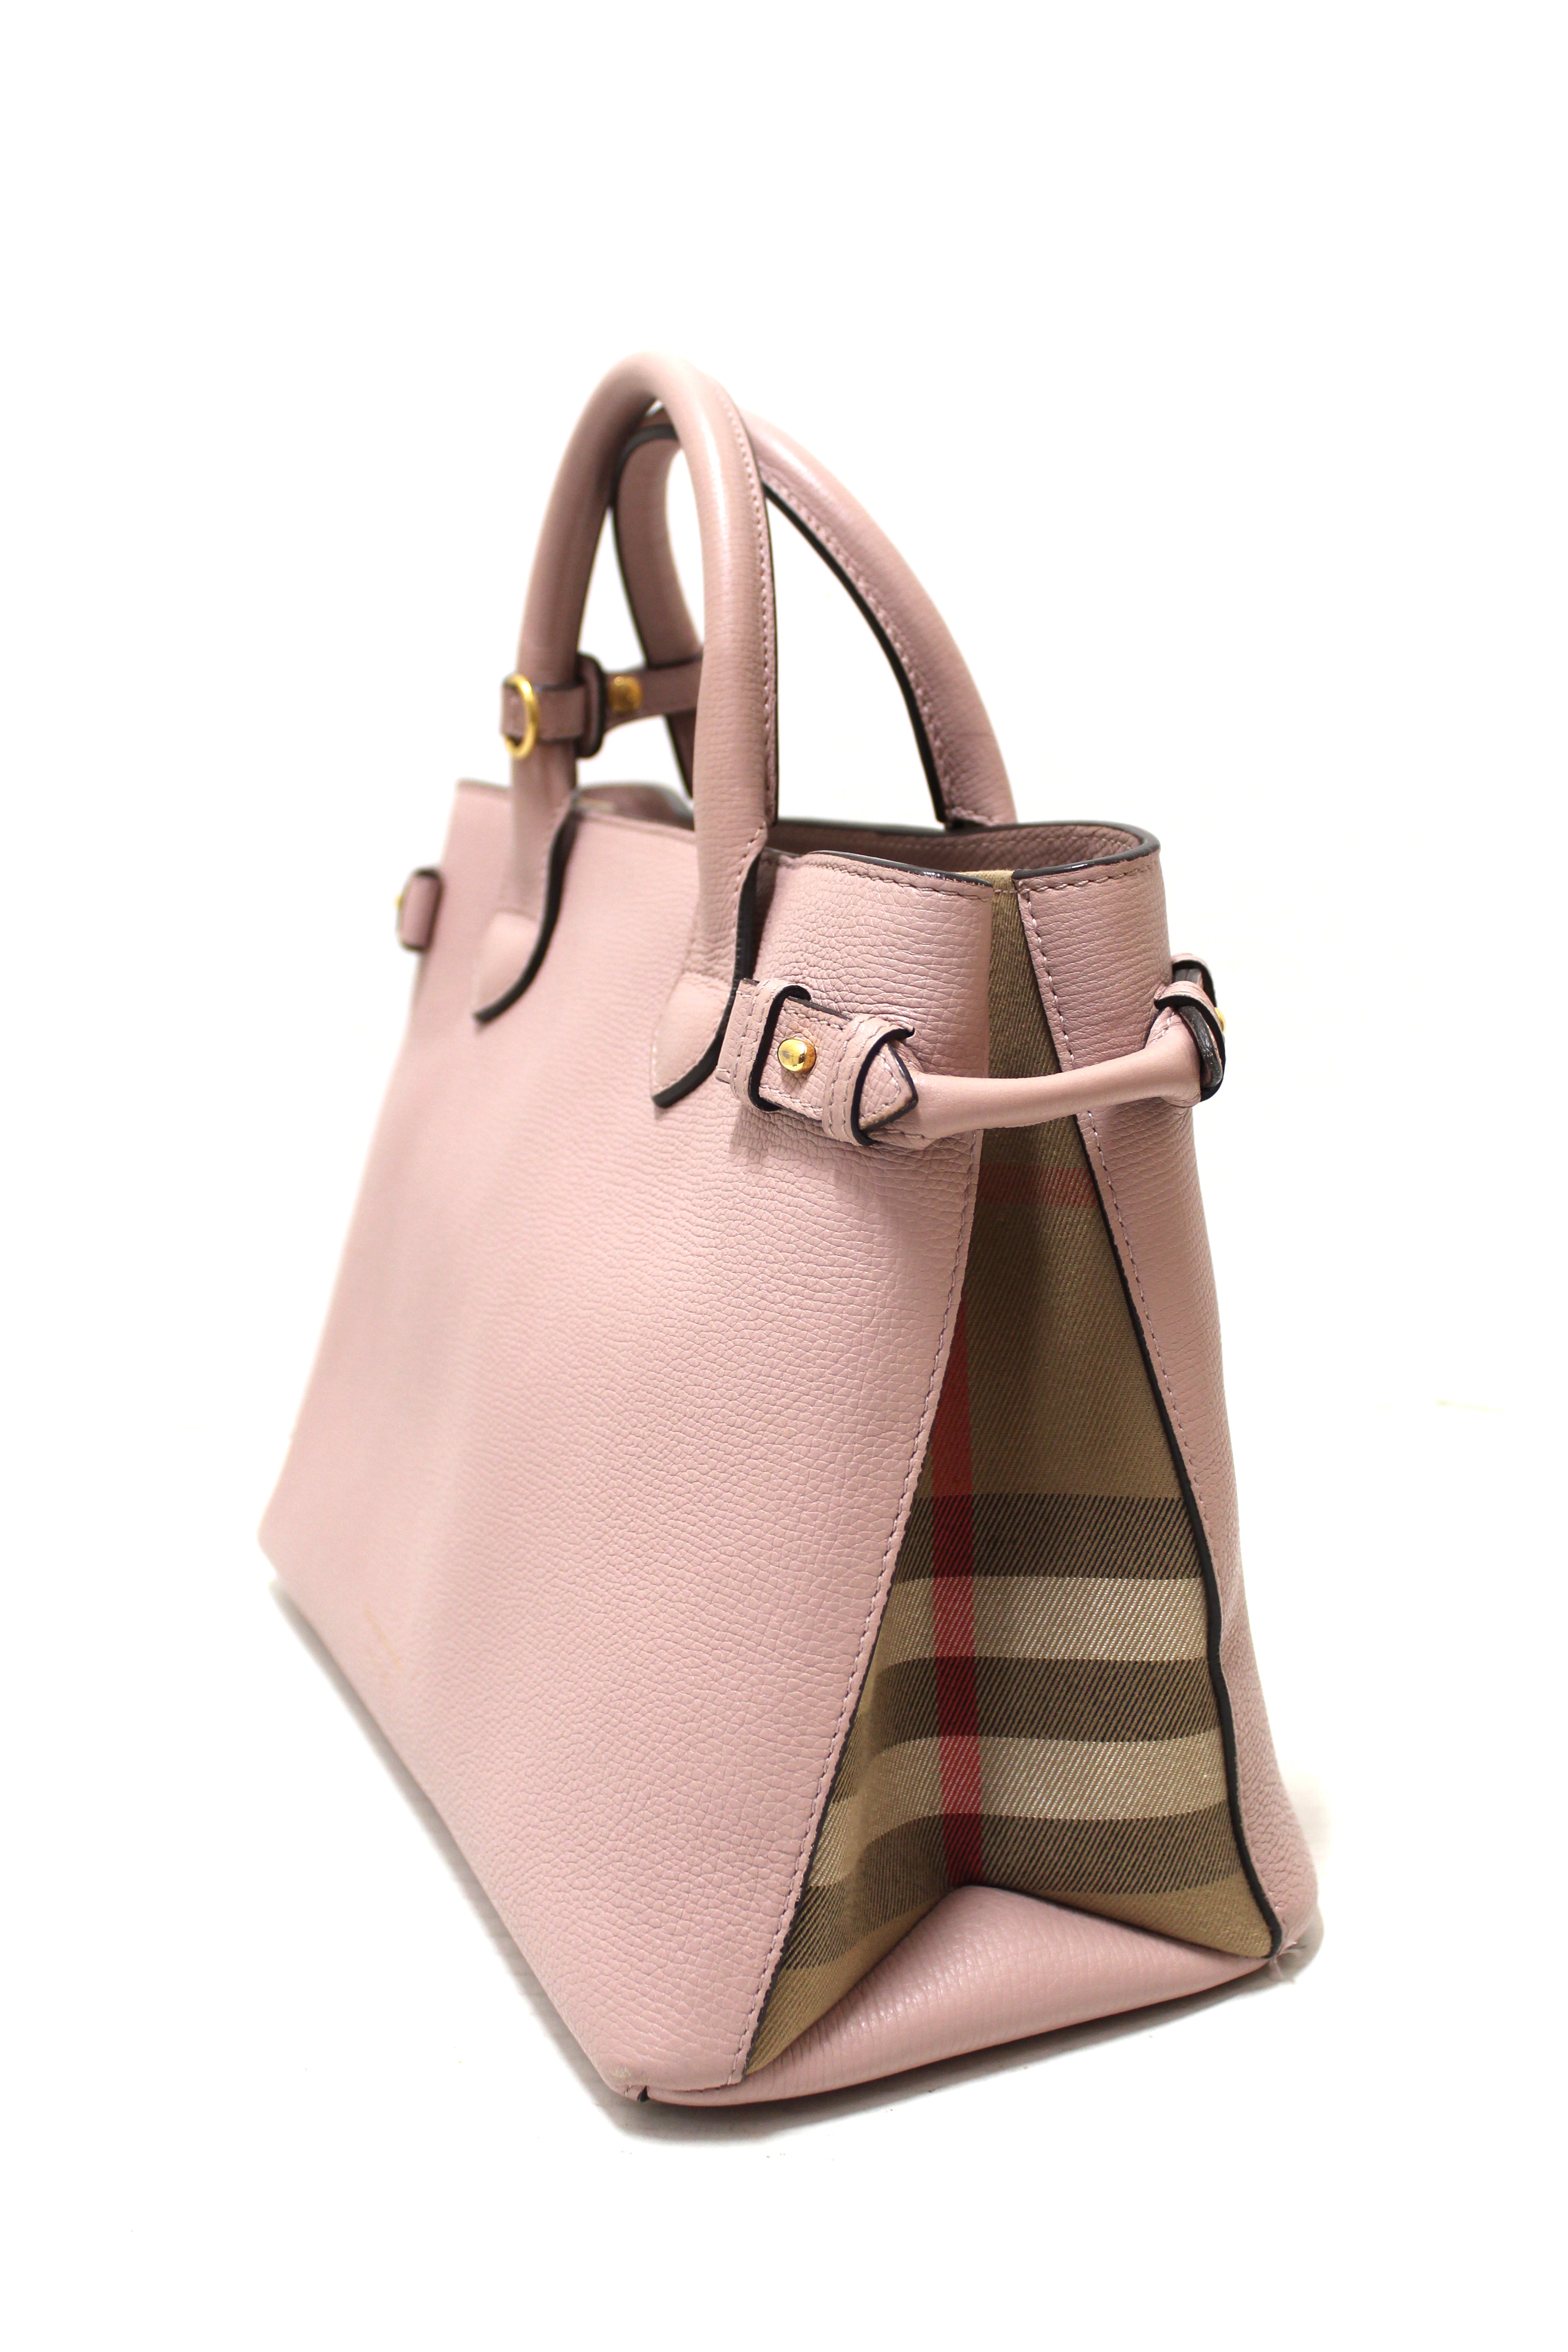 Burberry Blush Pink Leather and House Check Canvas Small Banner Tote  Burberry